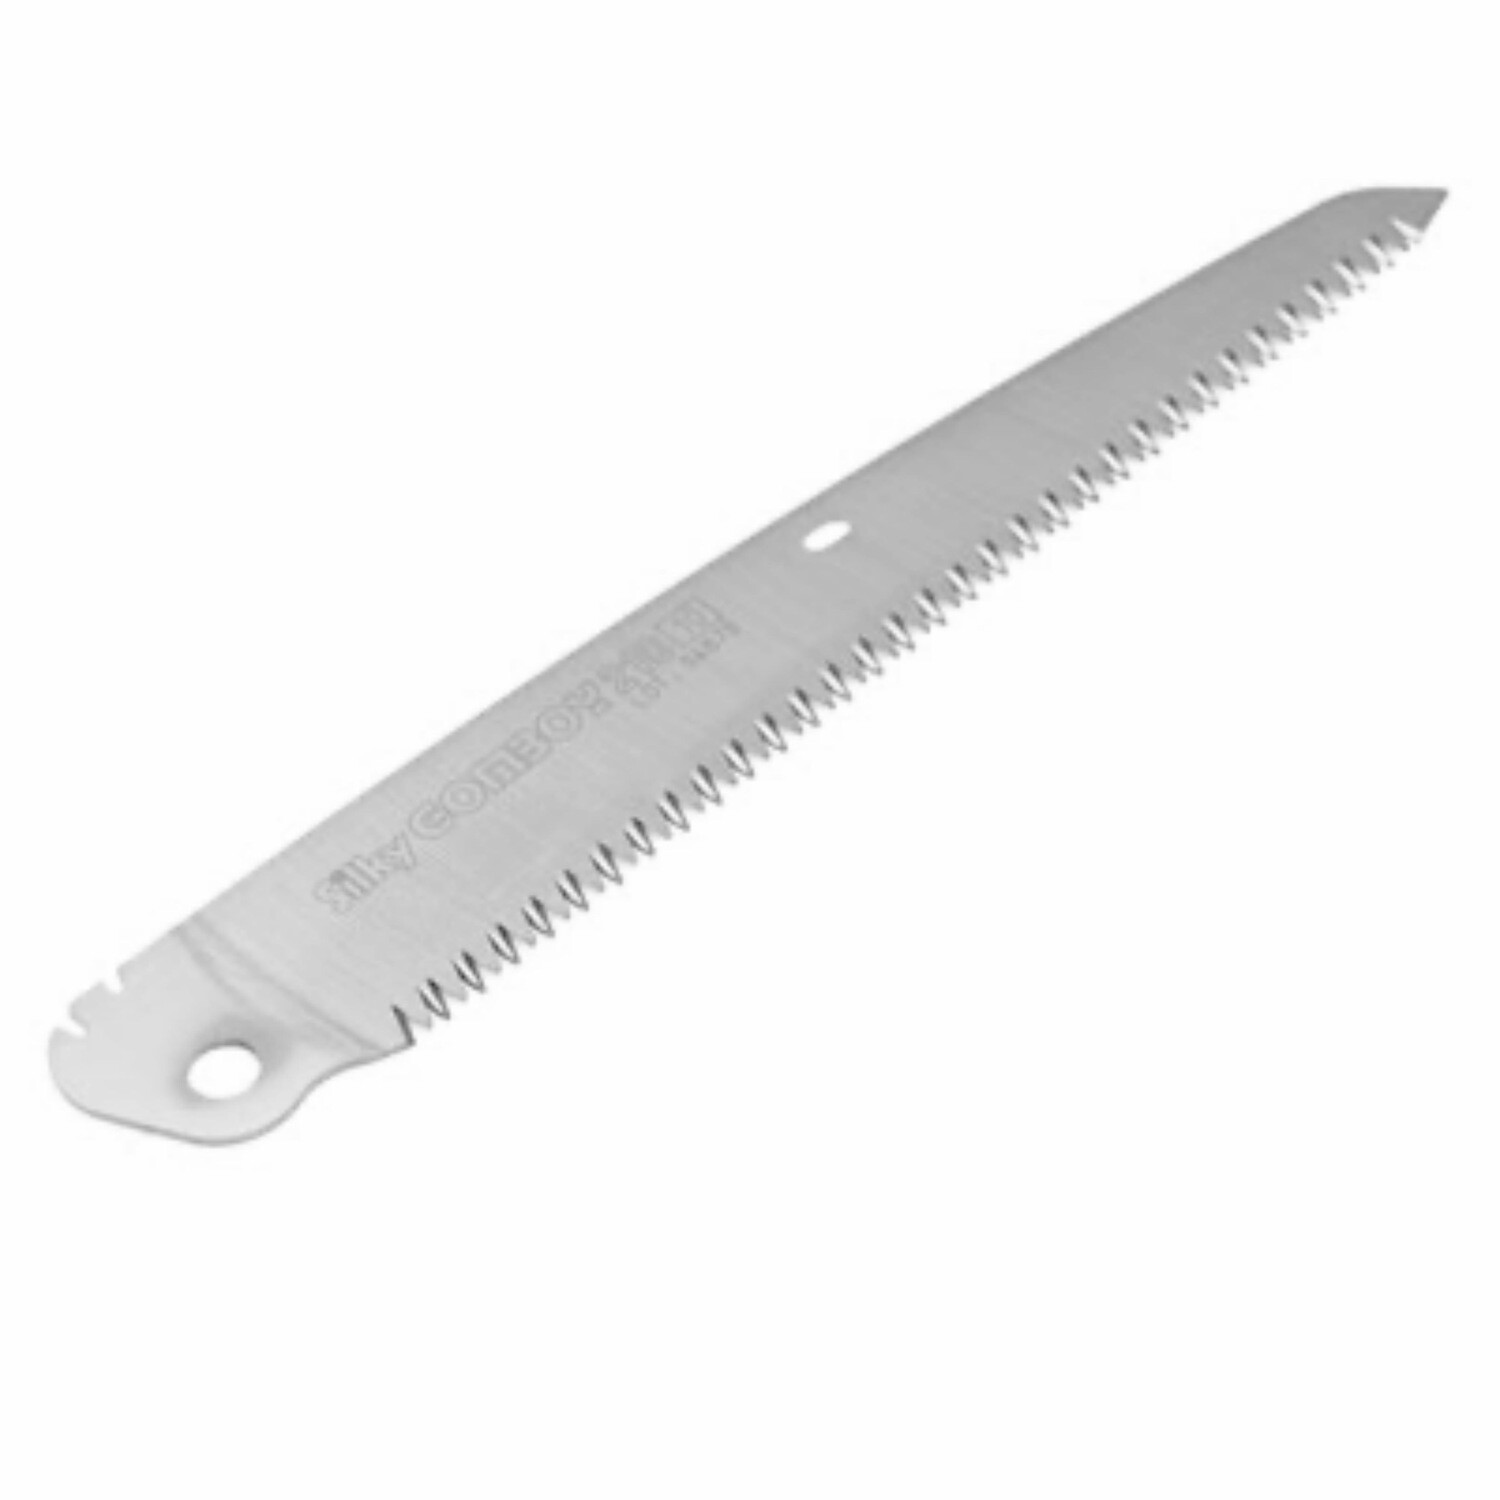 Silky GOMBOY 270mm Medium Teeth, Saw Replacement Blade [BLADE ONLY] - Click Image to Close